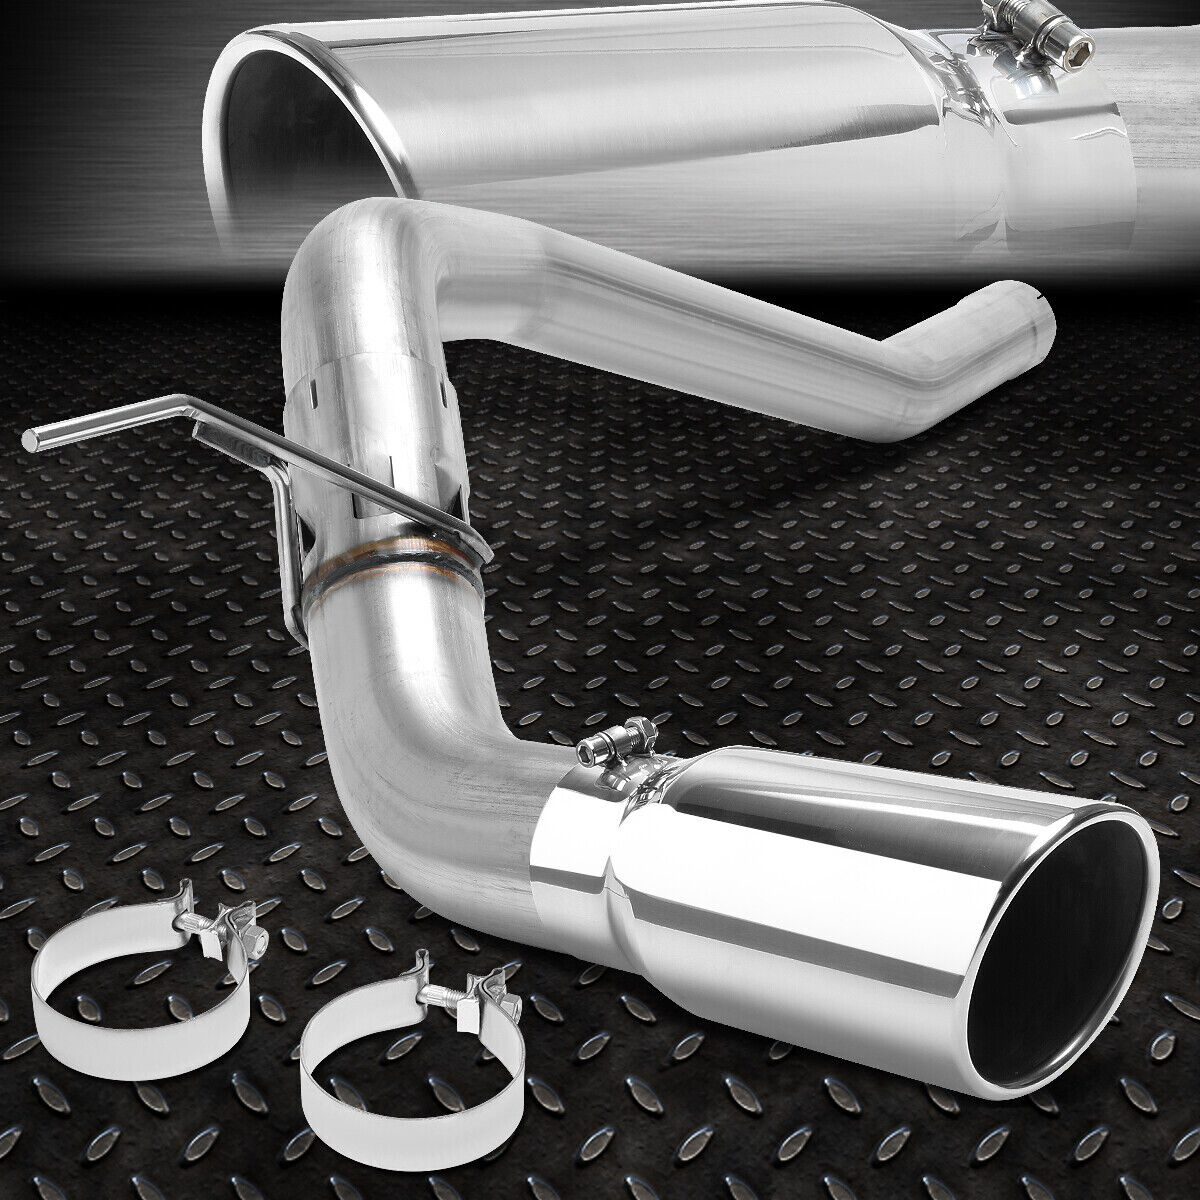 FOR 16-19 NISSAN TITAN XD 5.0T AXLE CATBACK EXHAUST SYSTEM+STAINLESS MUFFLER TIP